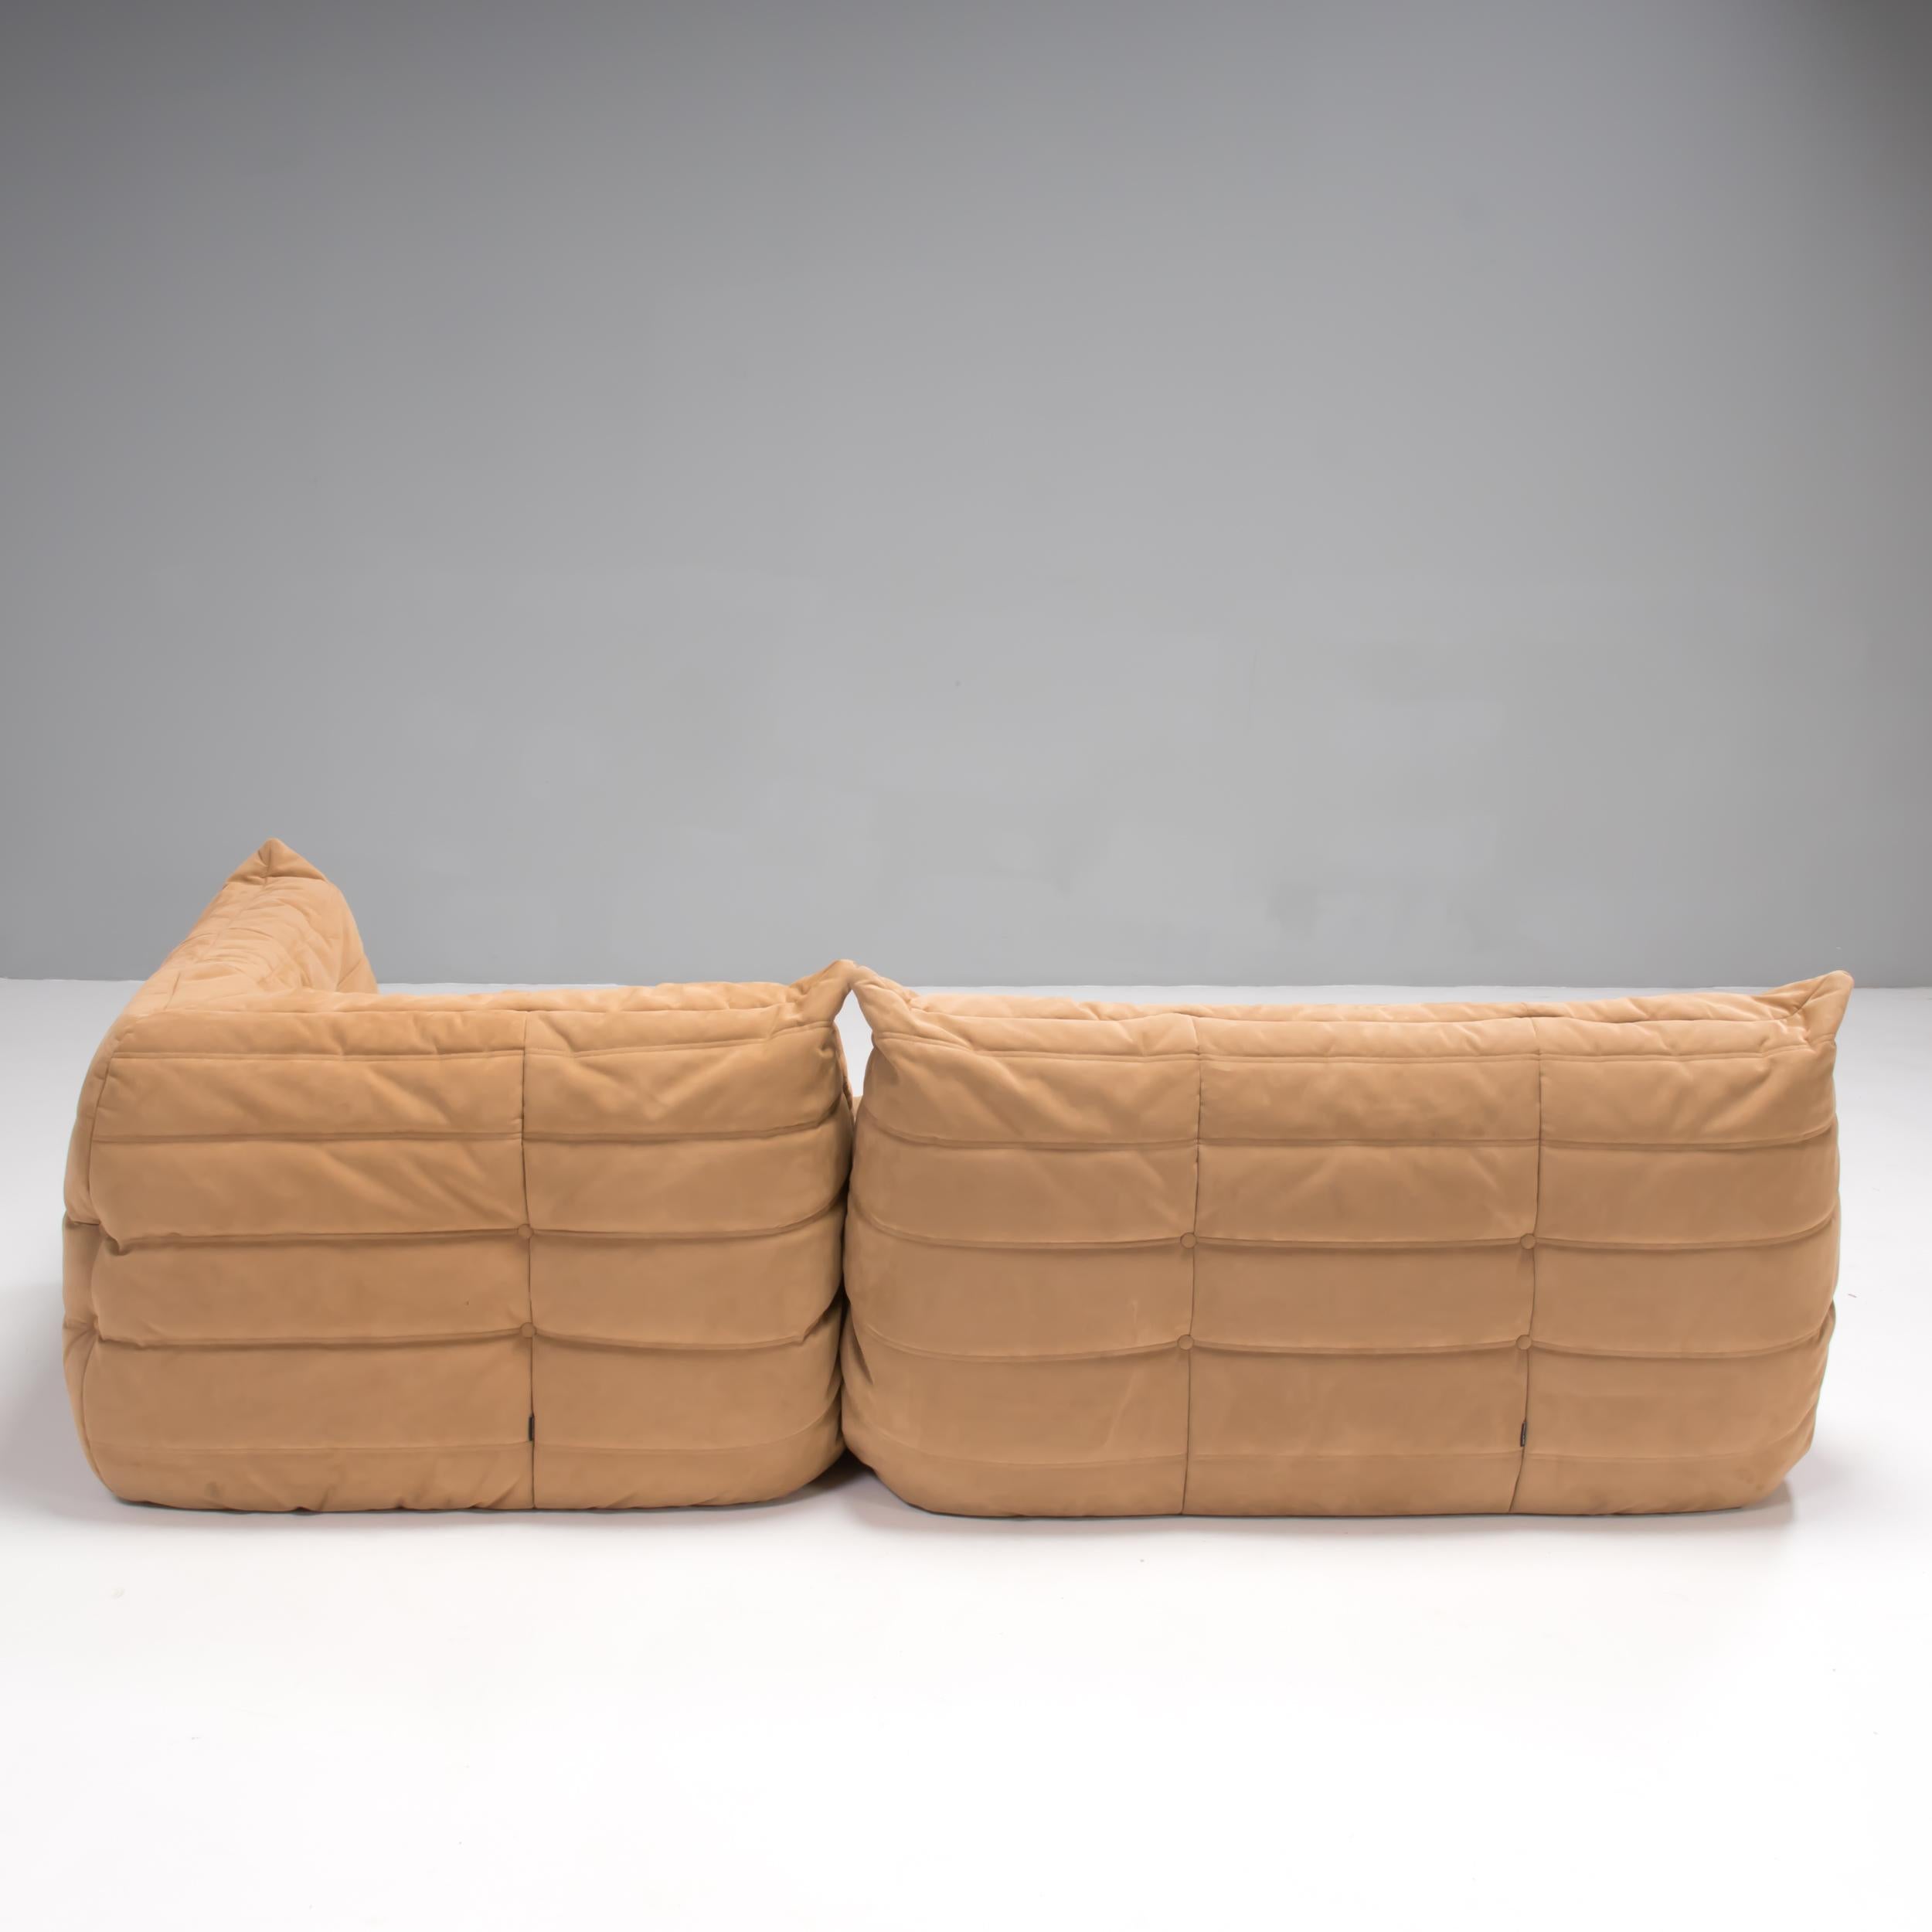 Late 20th Century Michel Ducaroy for Ligne Roset Togo 2 Seater Sofa and Corner in Brown Suede